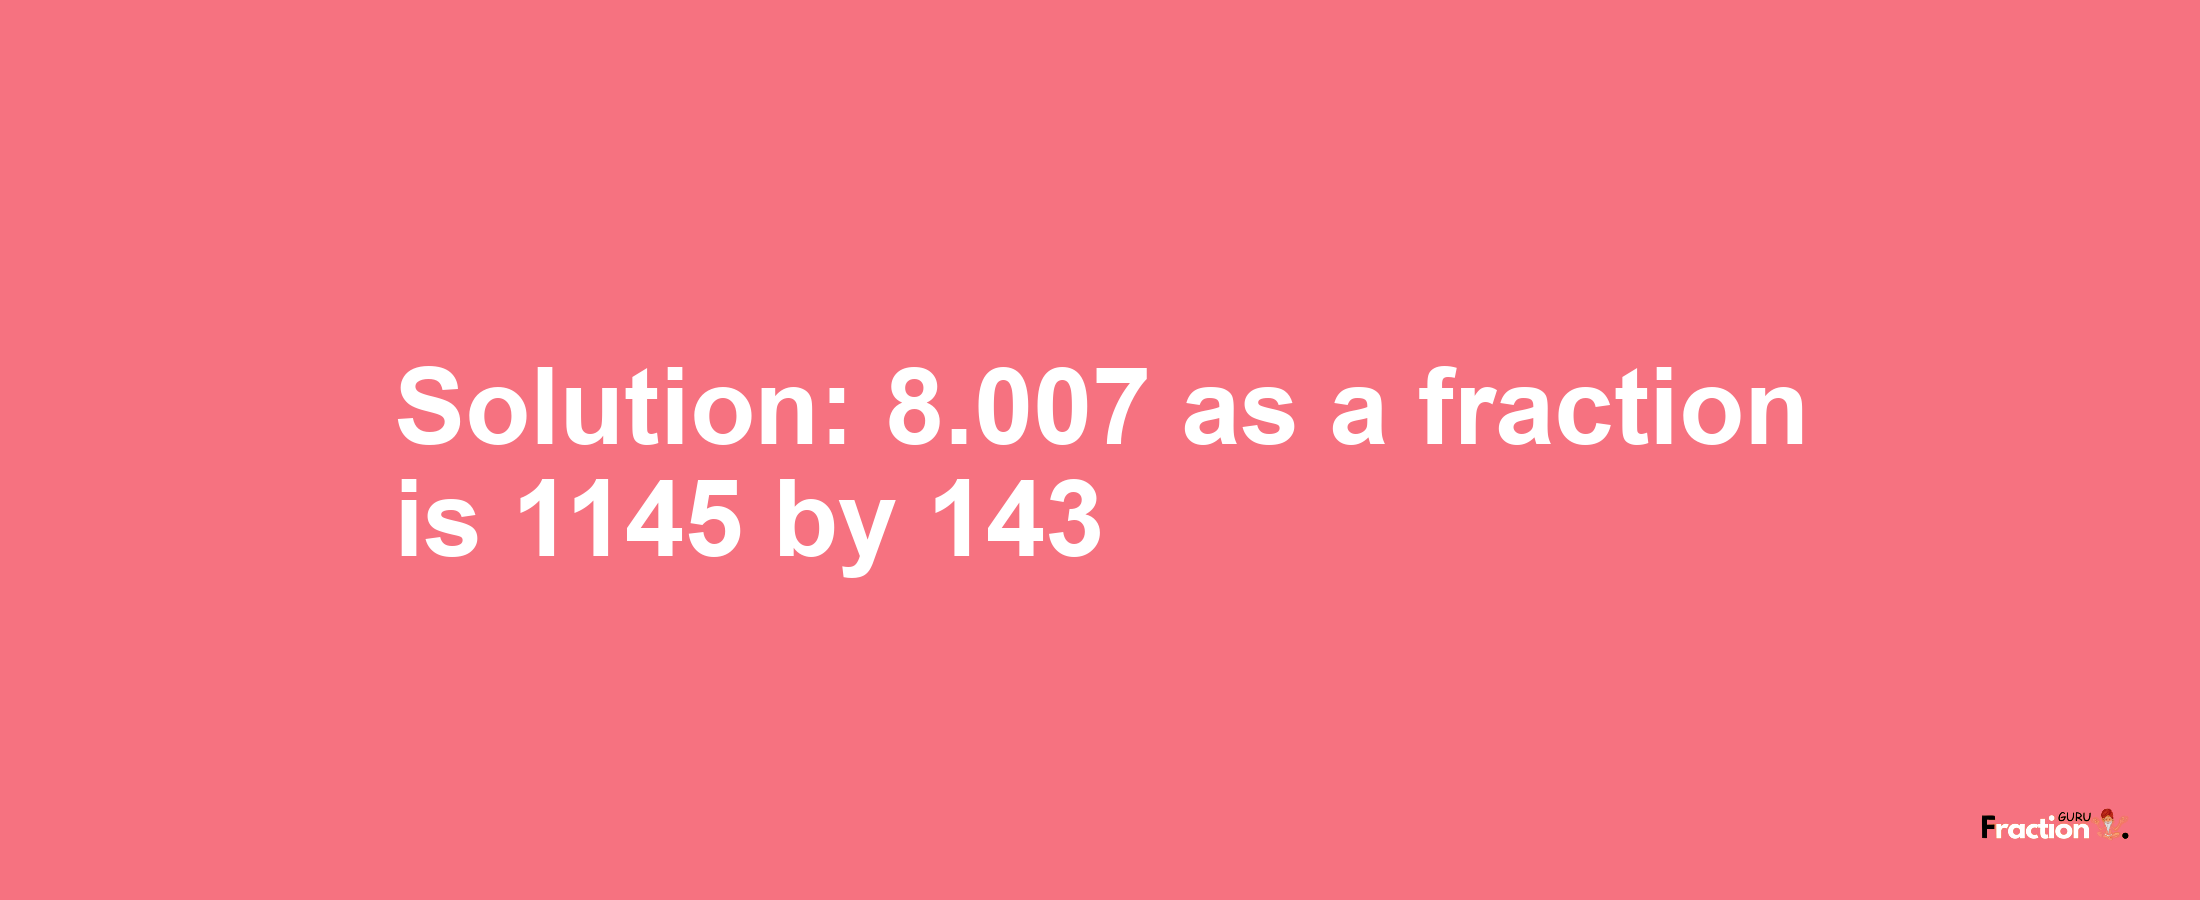 Solution:8.007 as a fraction is 1145/143